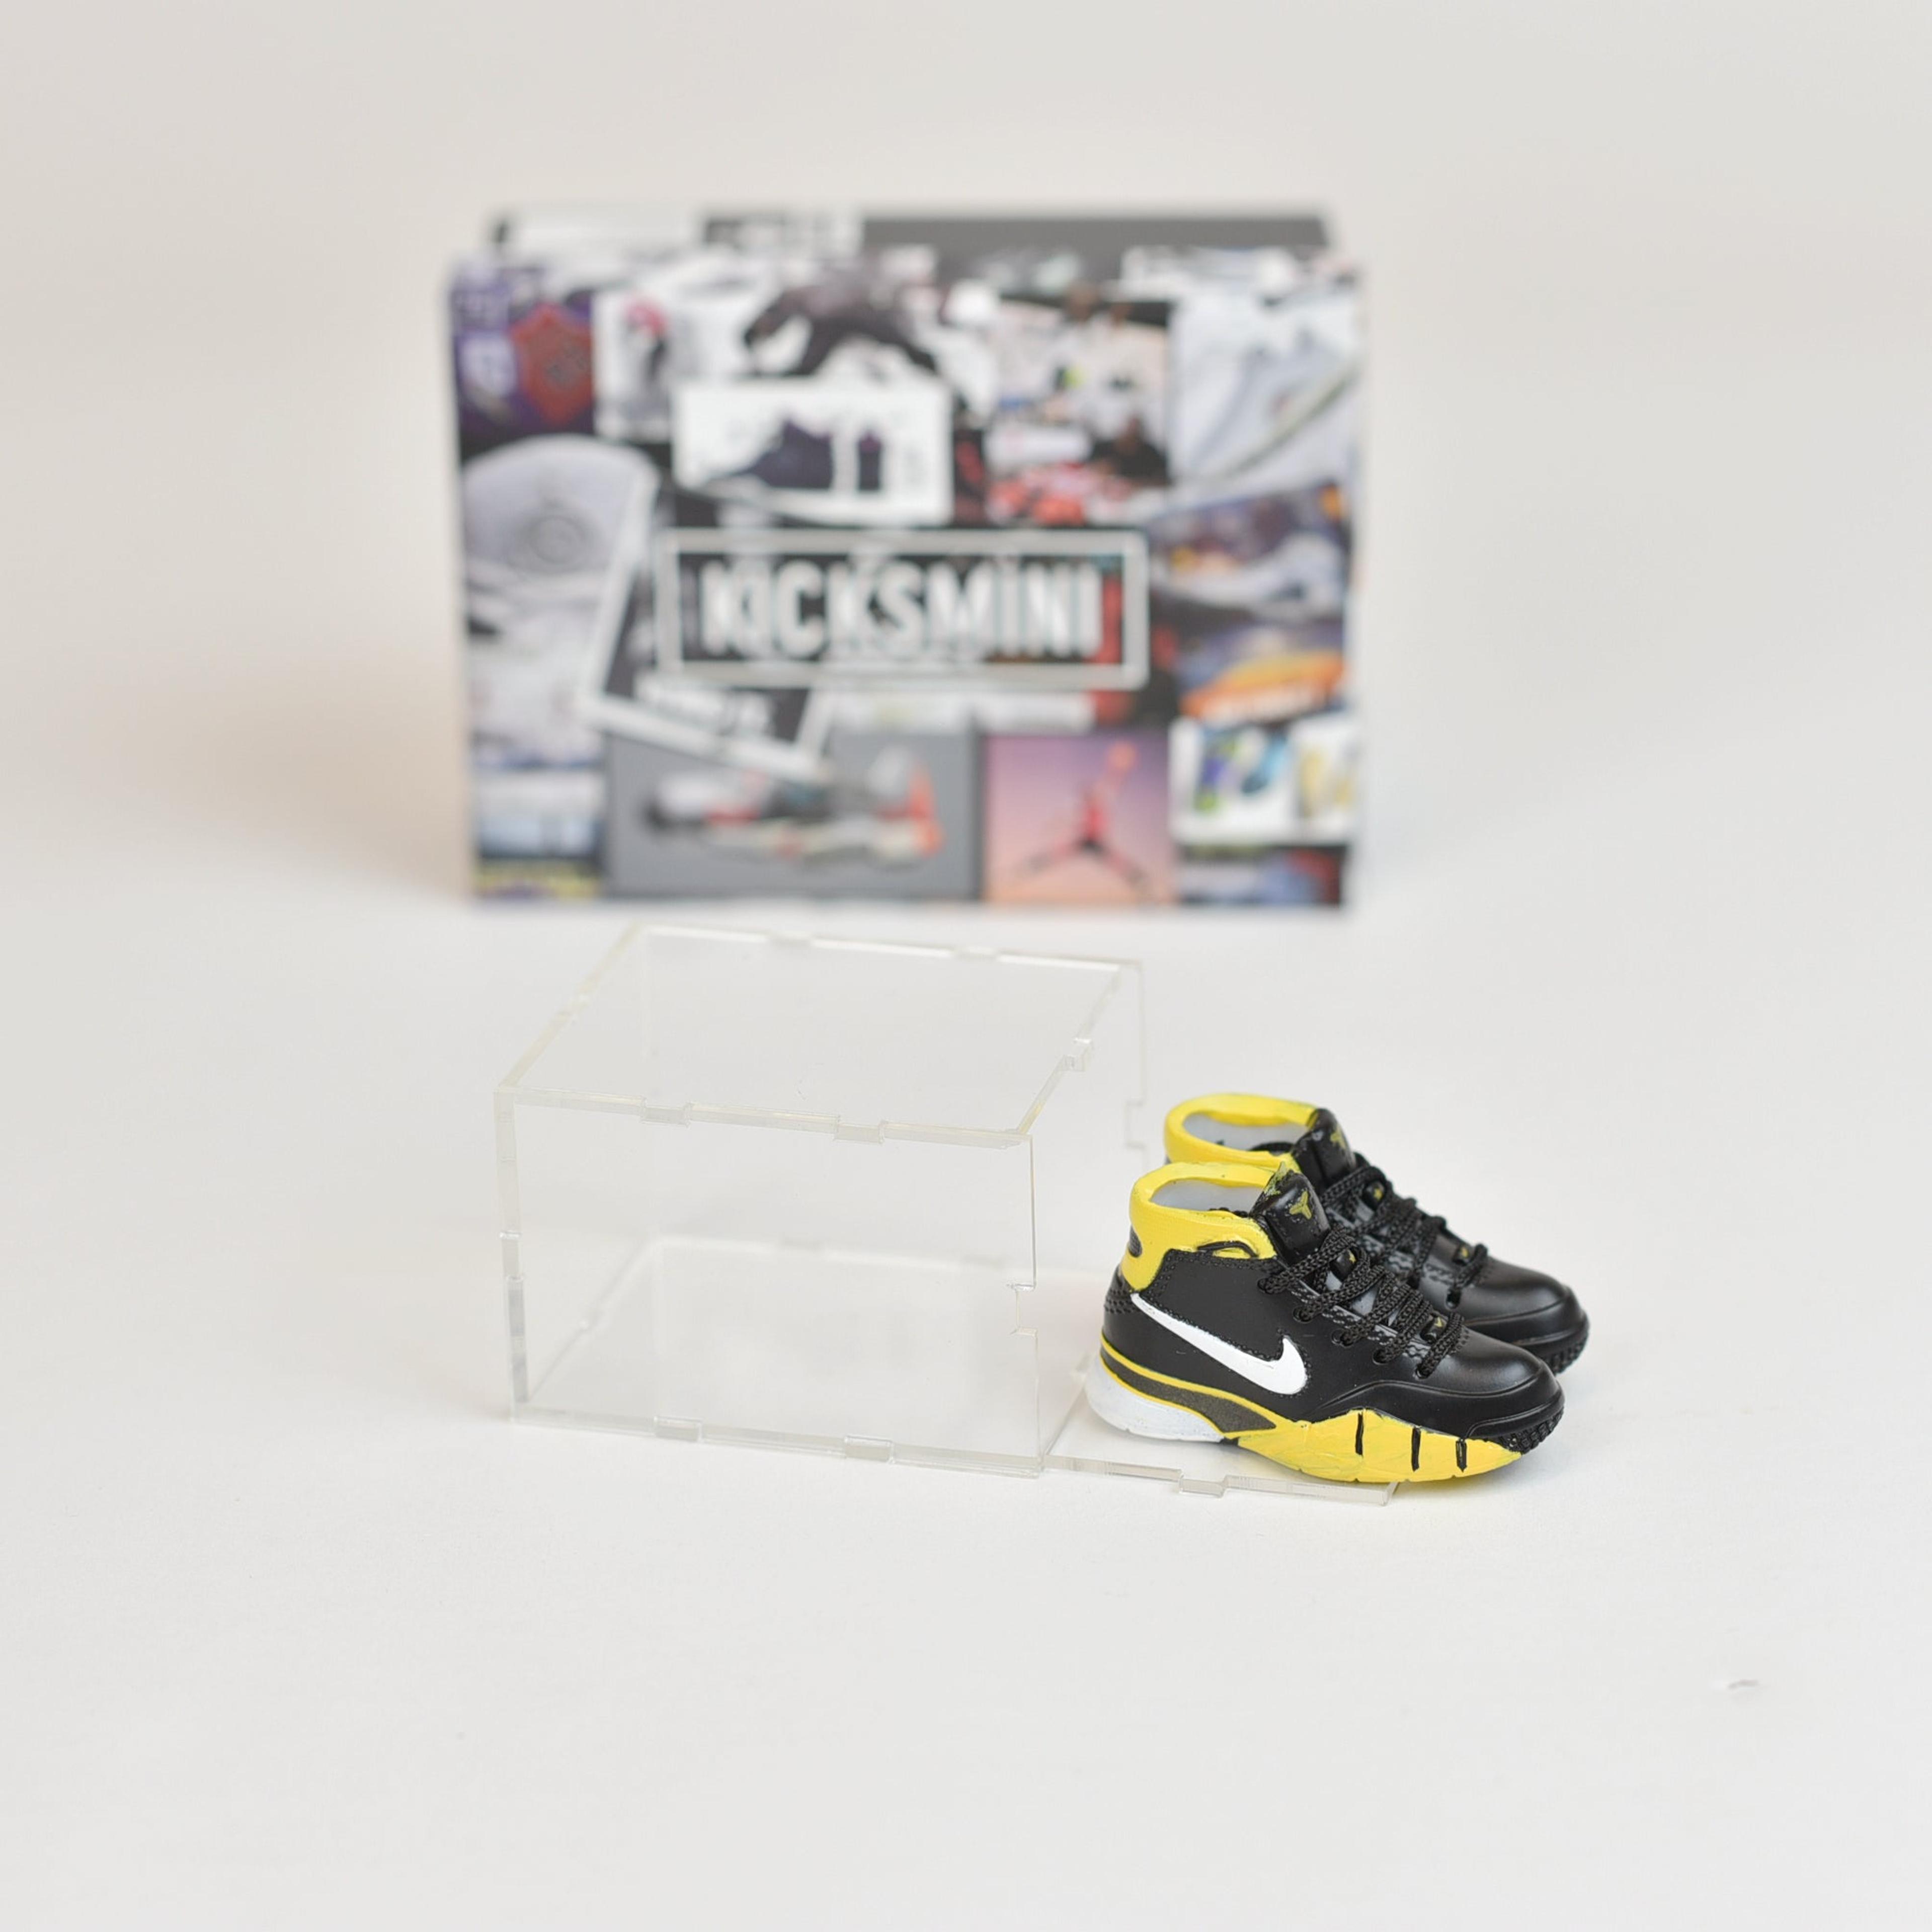 Alternate View 25 of Kobe Bryant/LeBron James/Steph Curry Mini Sneaker Collection wit